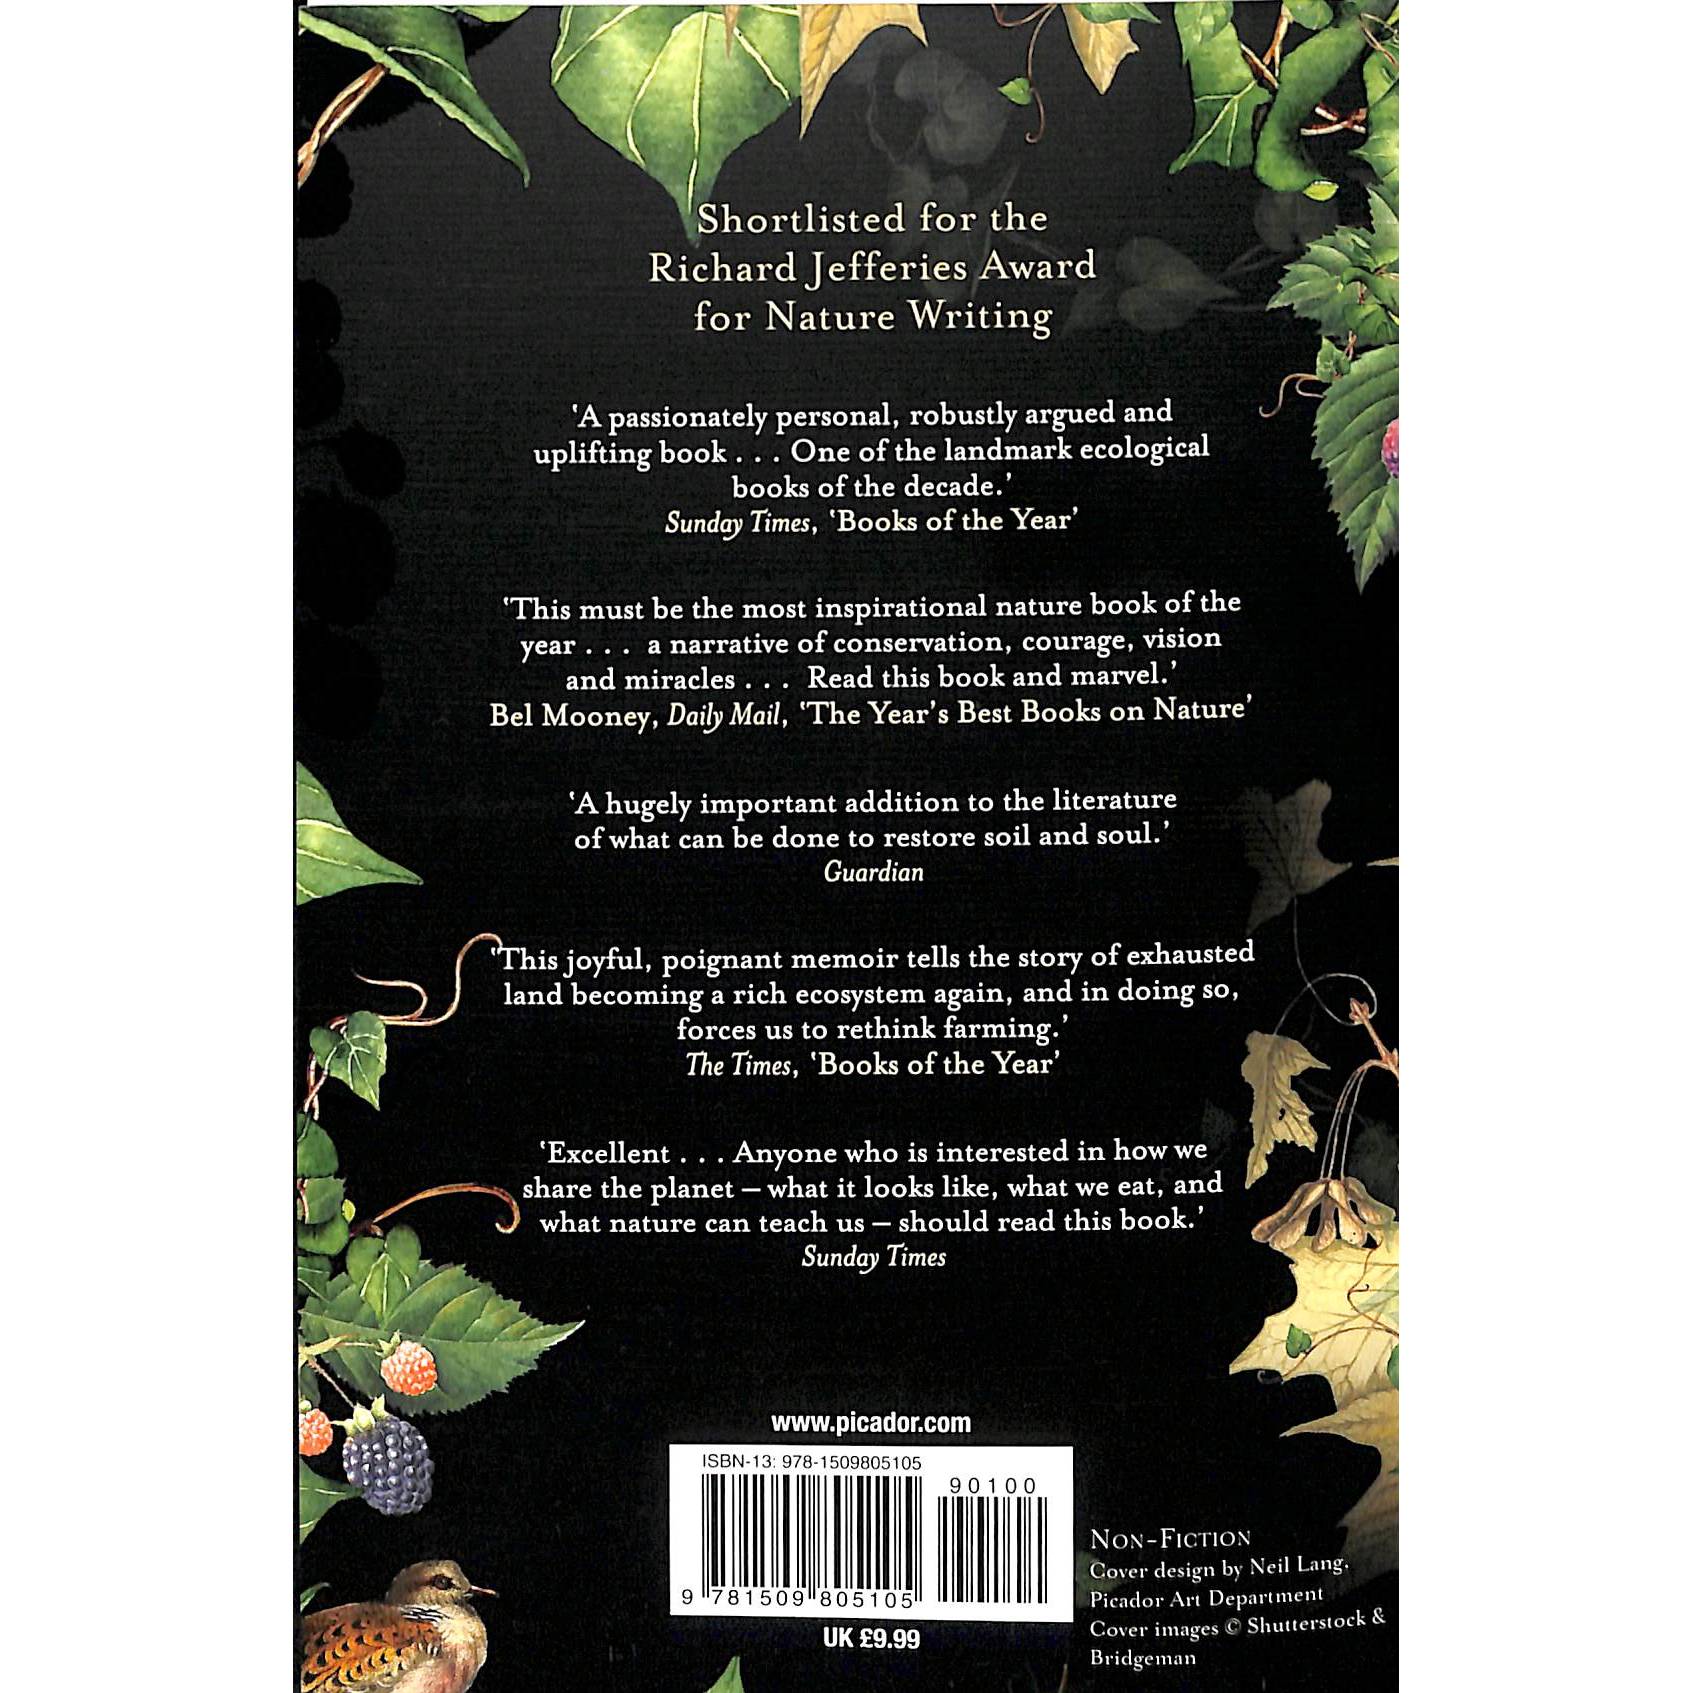 back cover of book sleeve